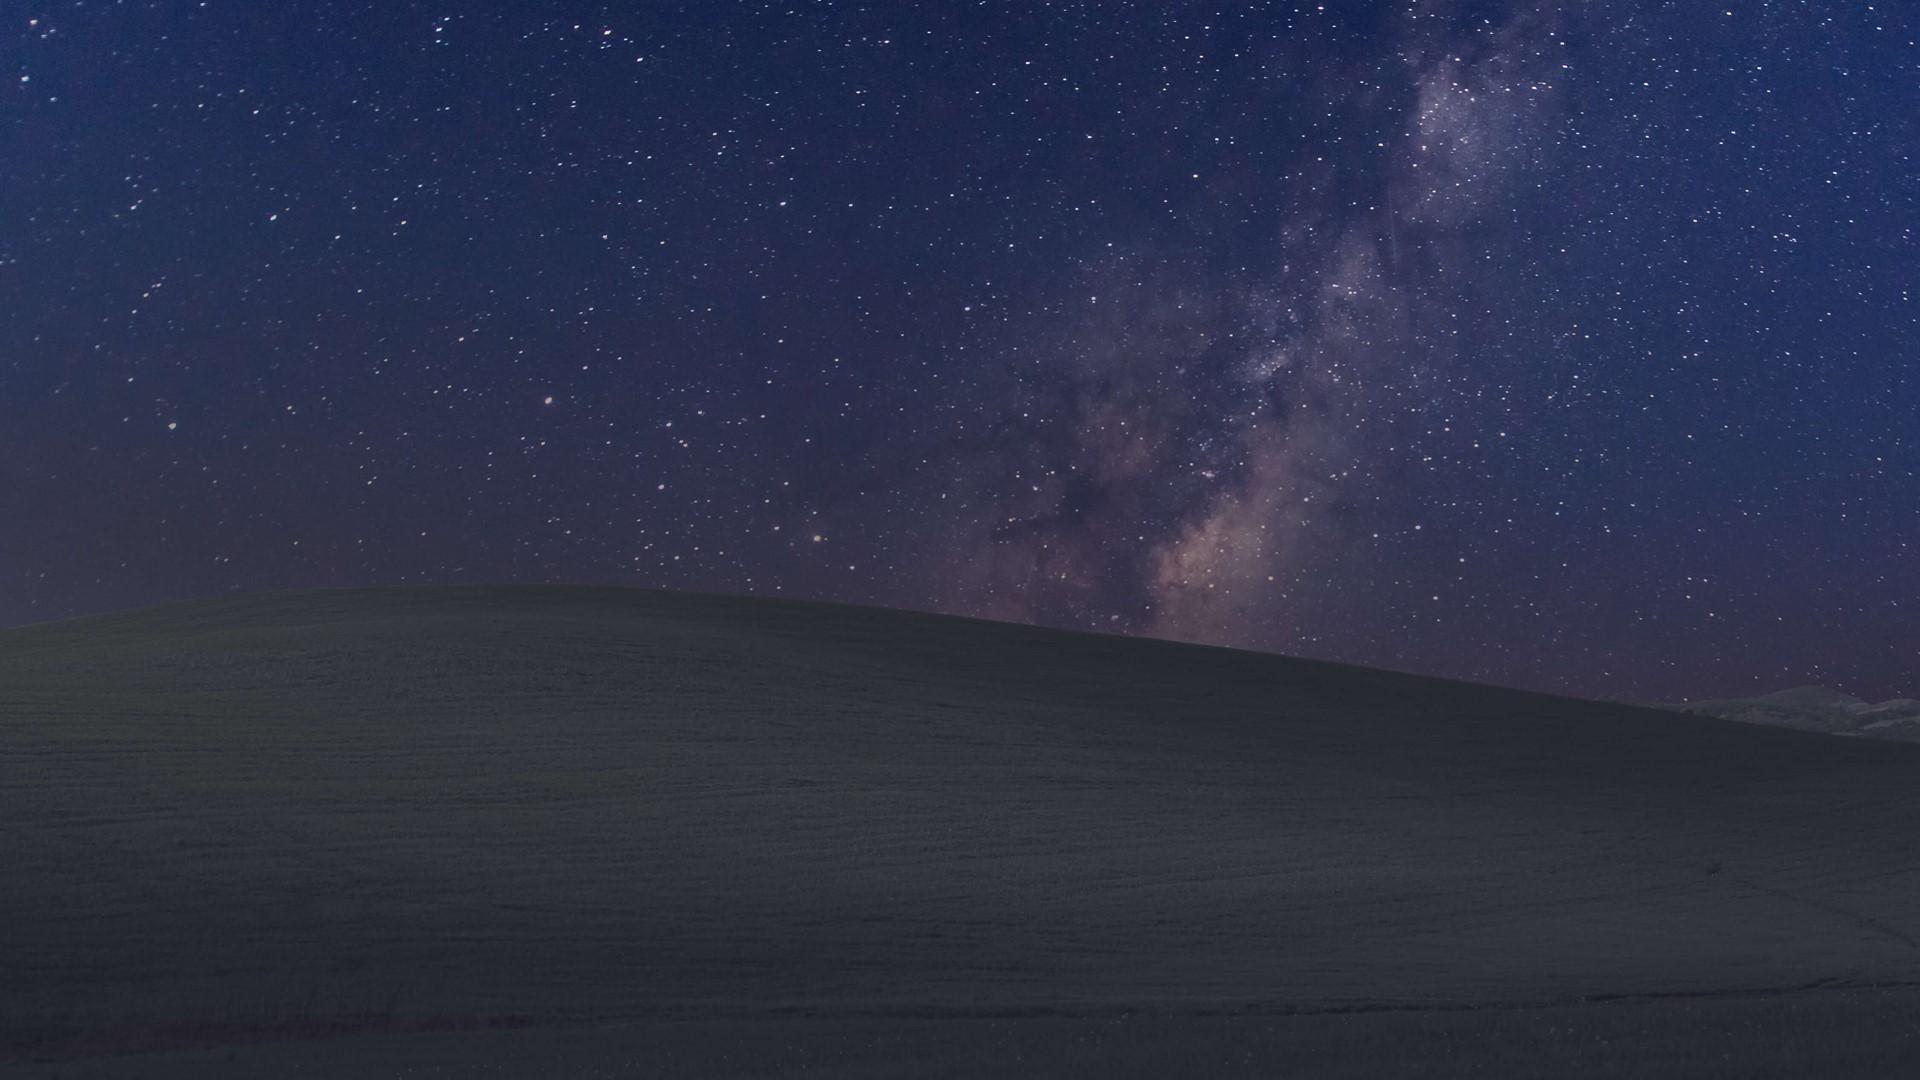 These two Windows 10 Wallpaper are perfect for your darker side